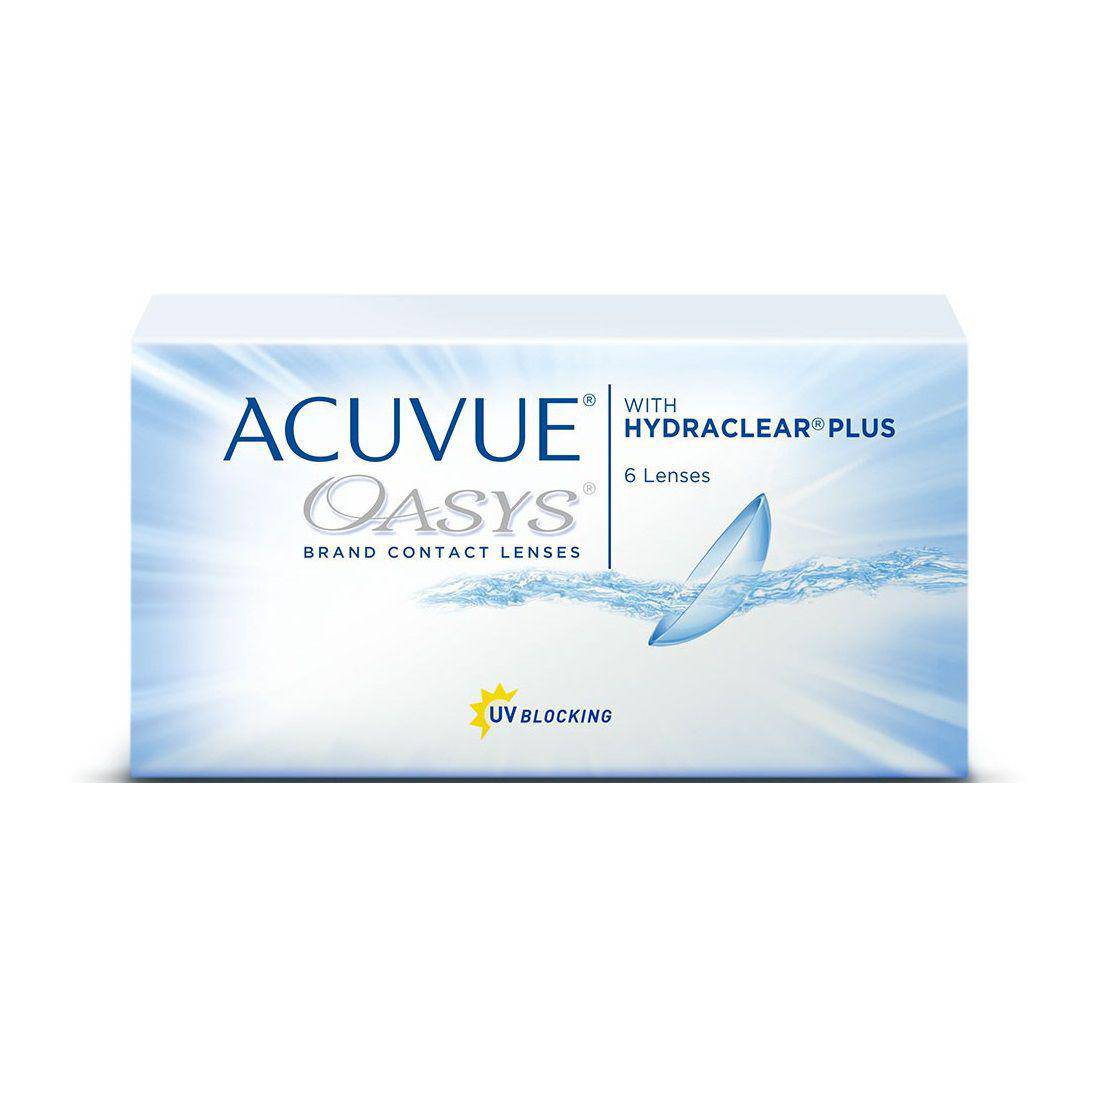 acuvue-oasys-with-hydraclear-plus-pack-of-6